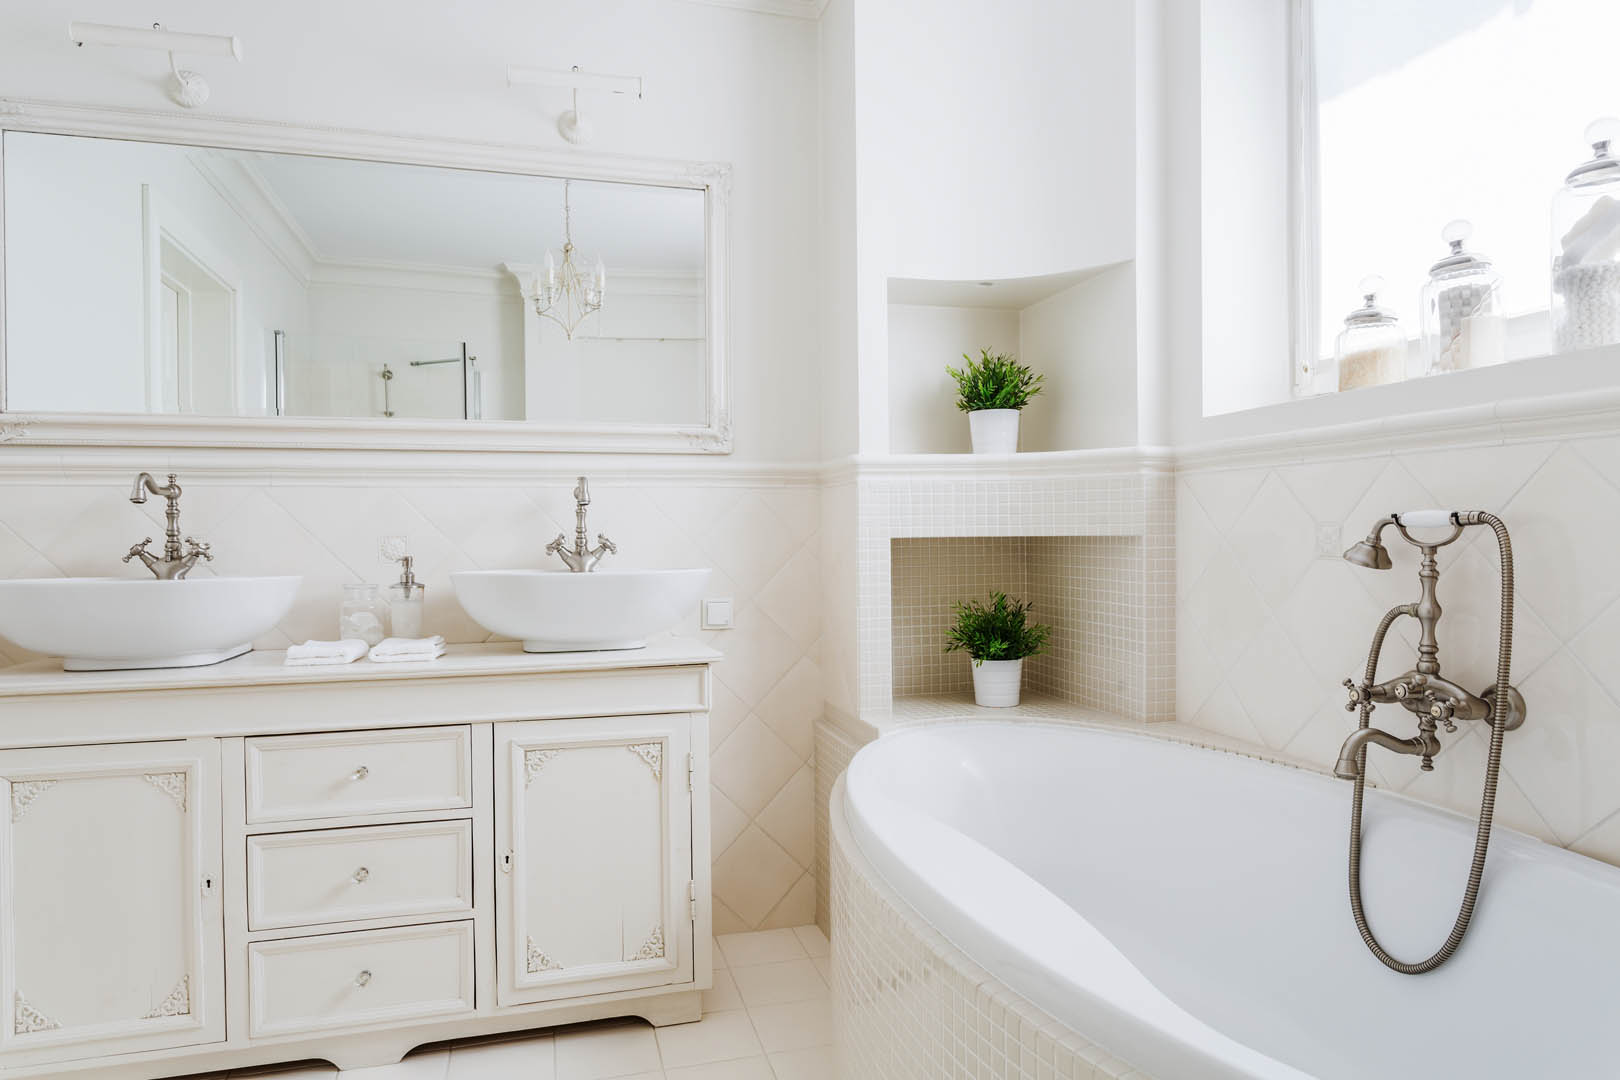 A bathroom with white walls and floors, and a large tub.